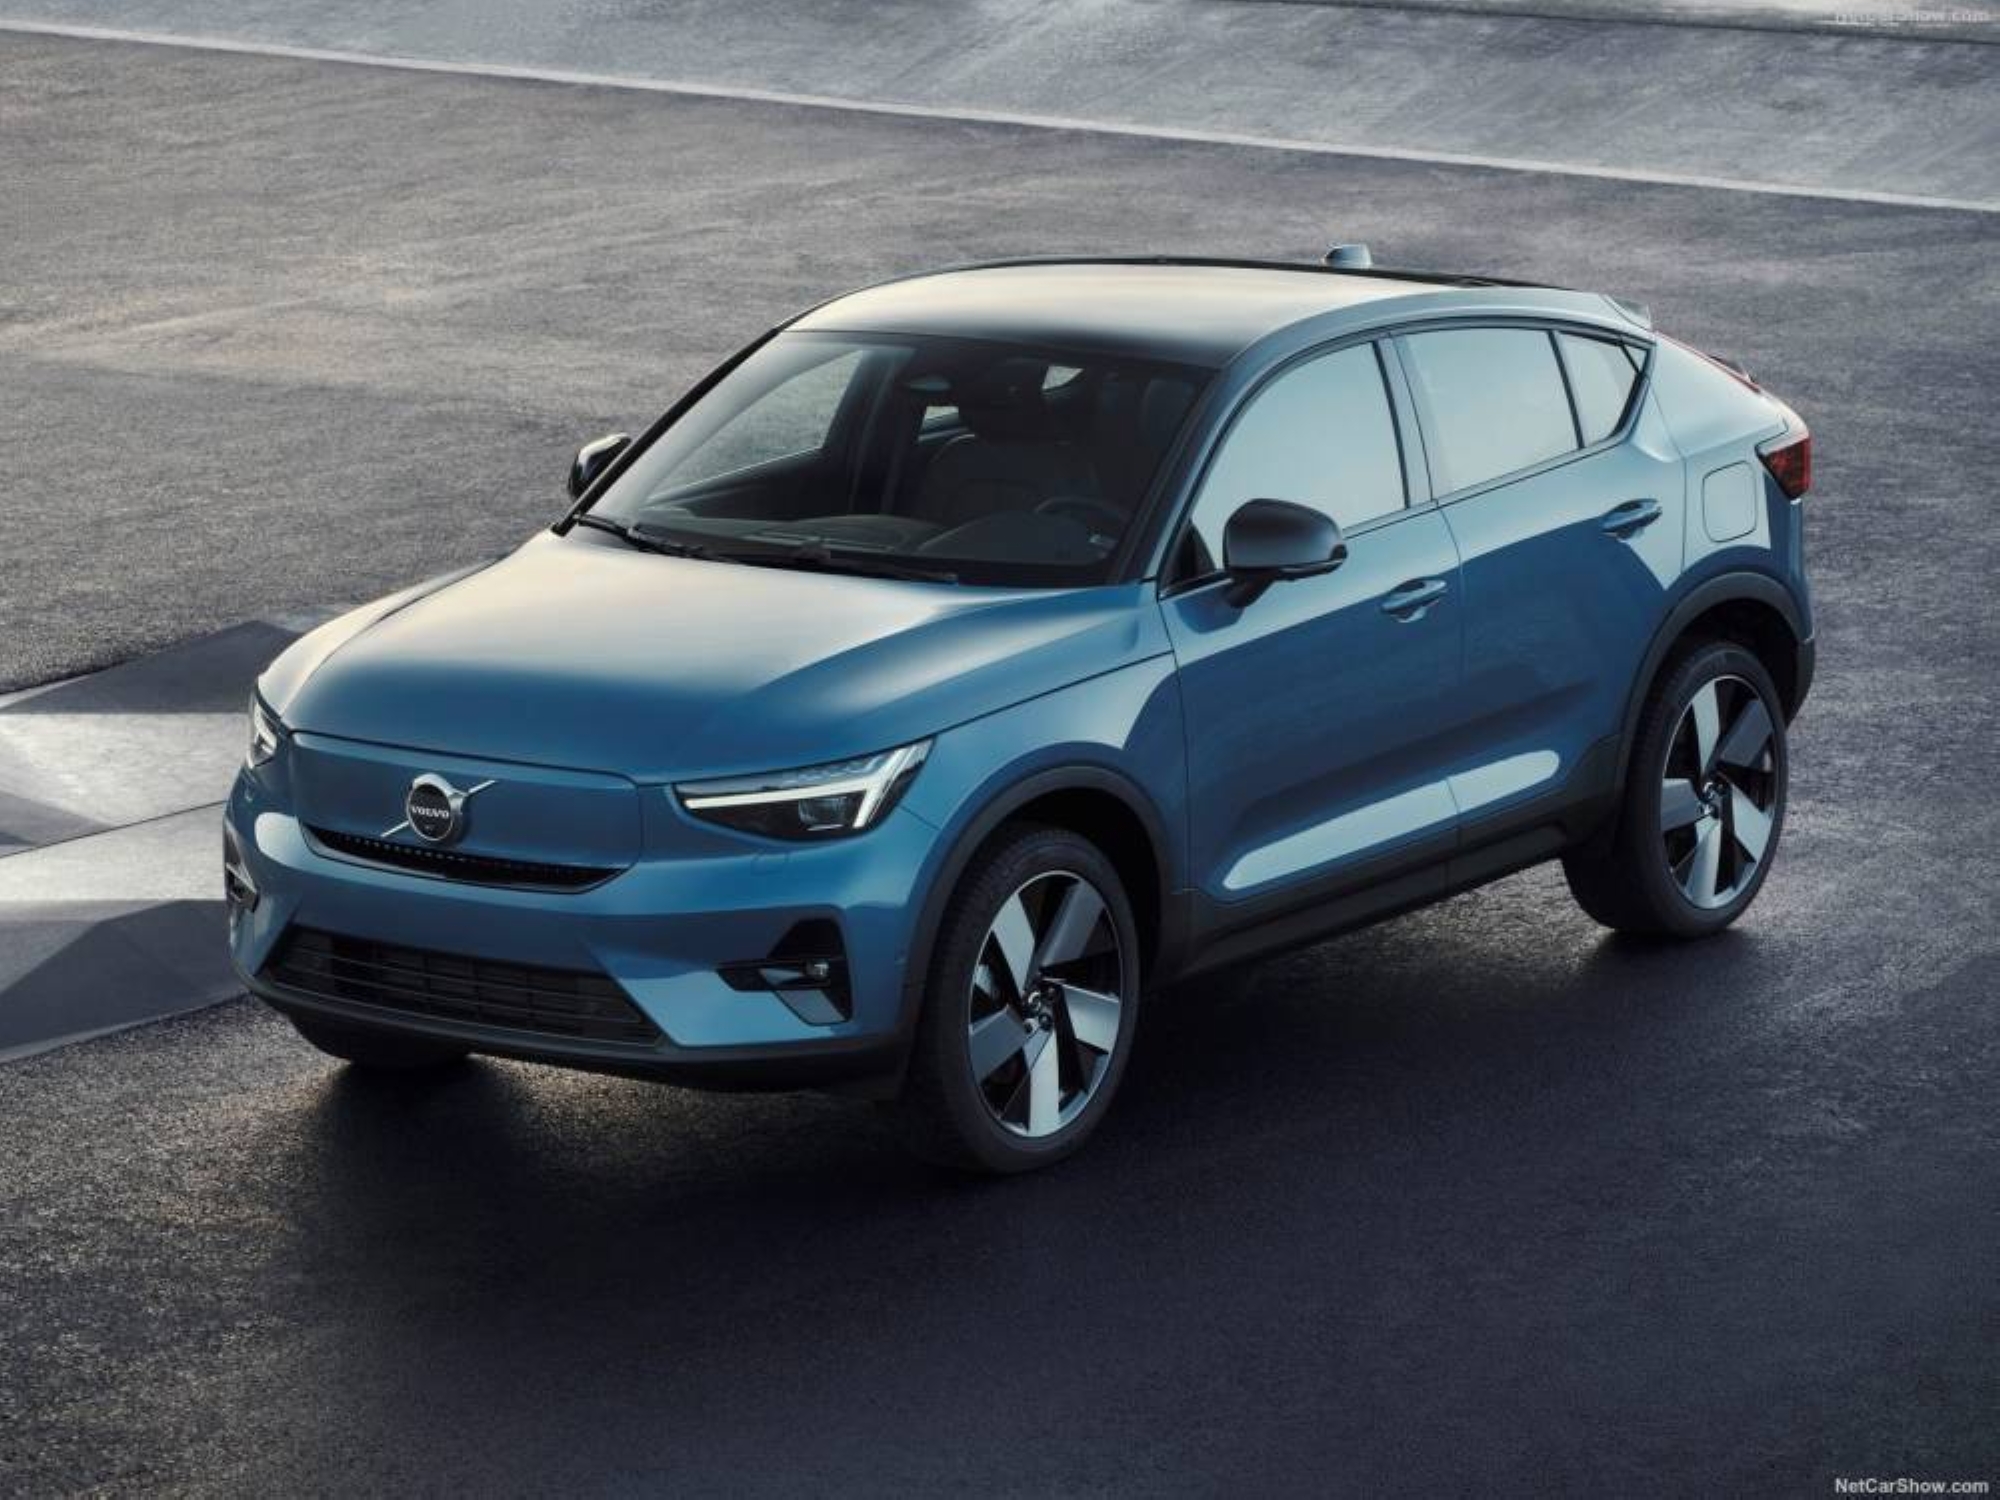 The new Volvo XC40 and C40 electric cars will soon be available in Morocco